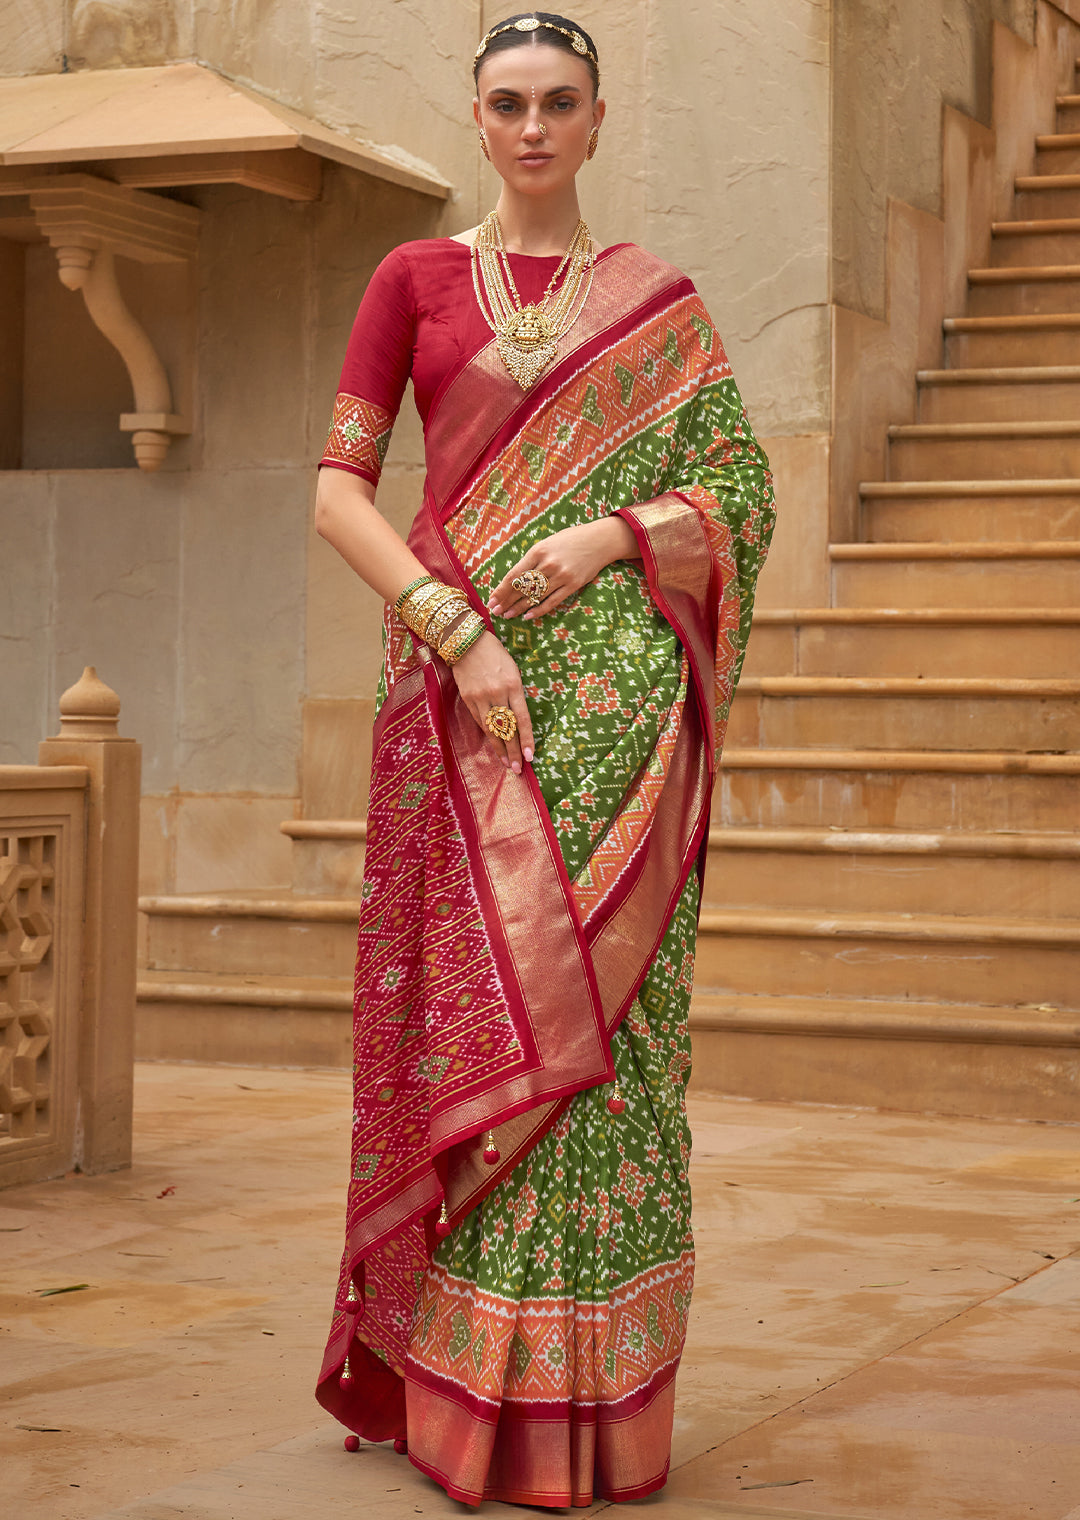 Celebrate India's Heritage with the India Green Woven Patola Silk Saree"